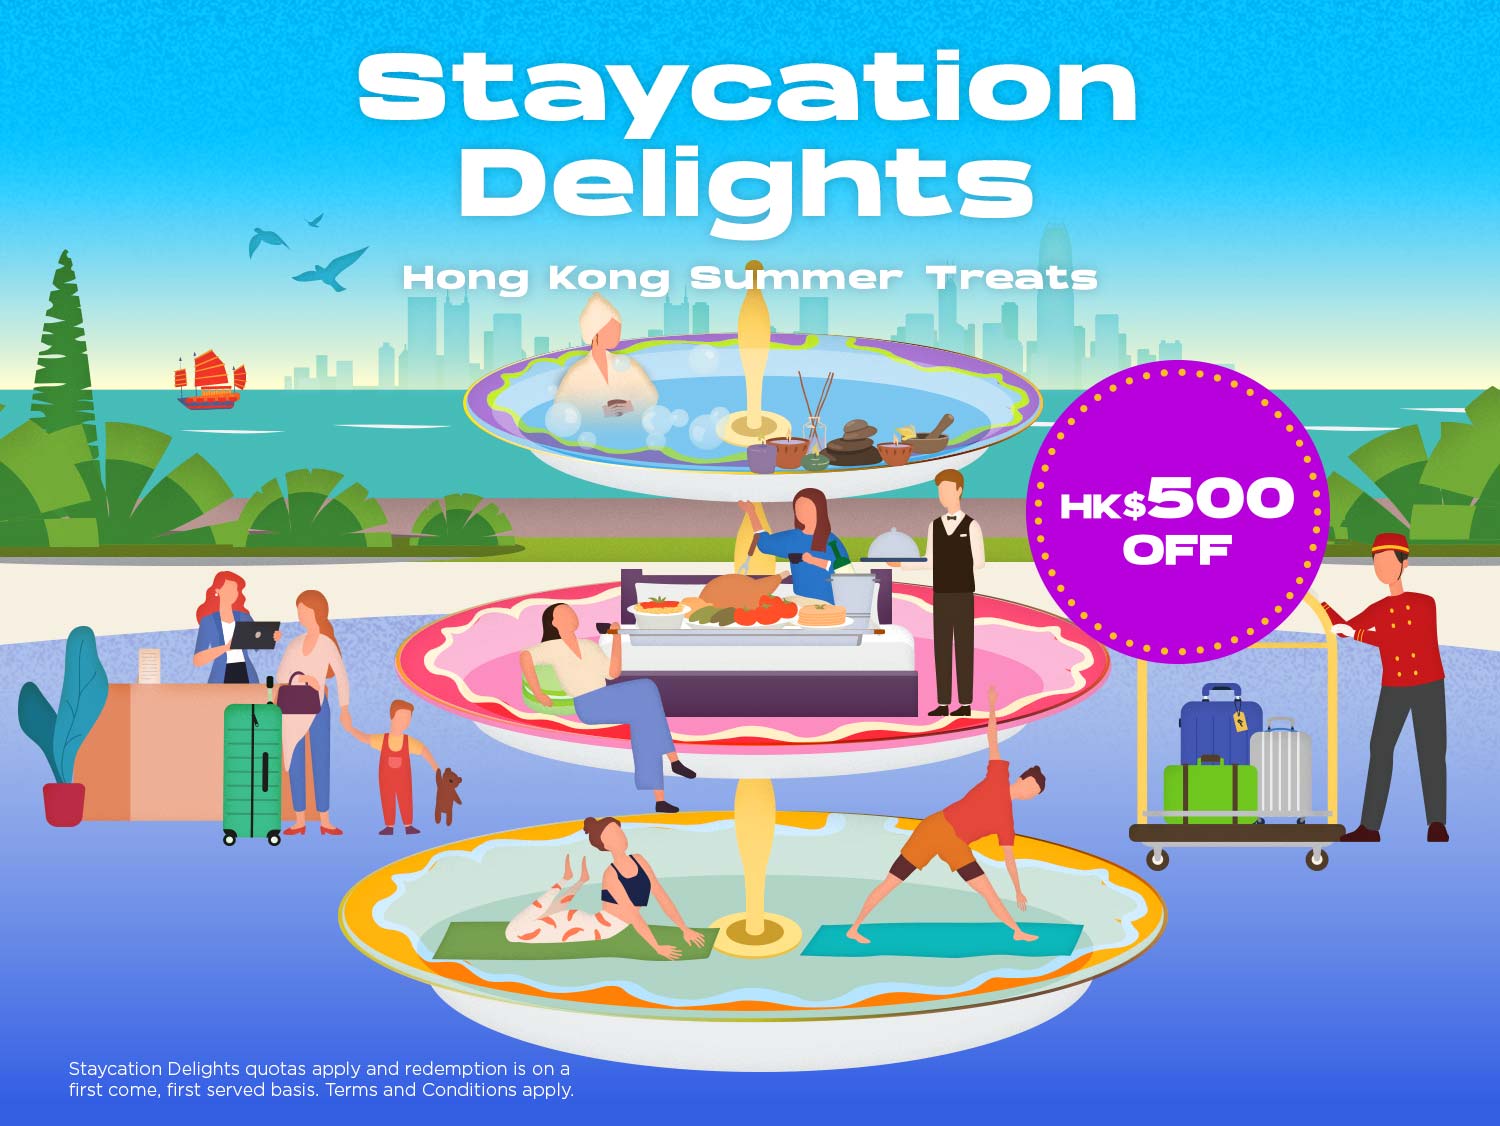 4th Round of “Spend-to-Redeem Staycation” Programme